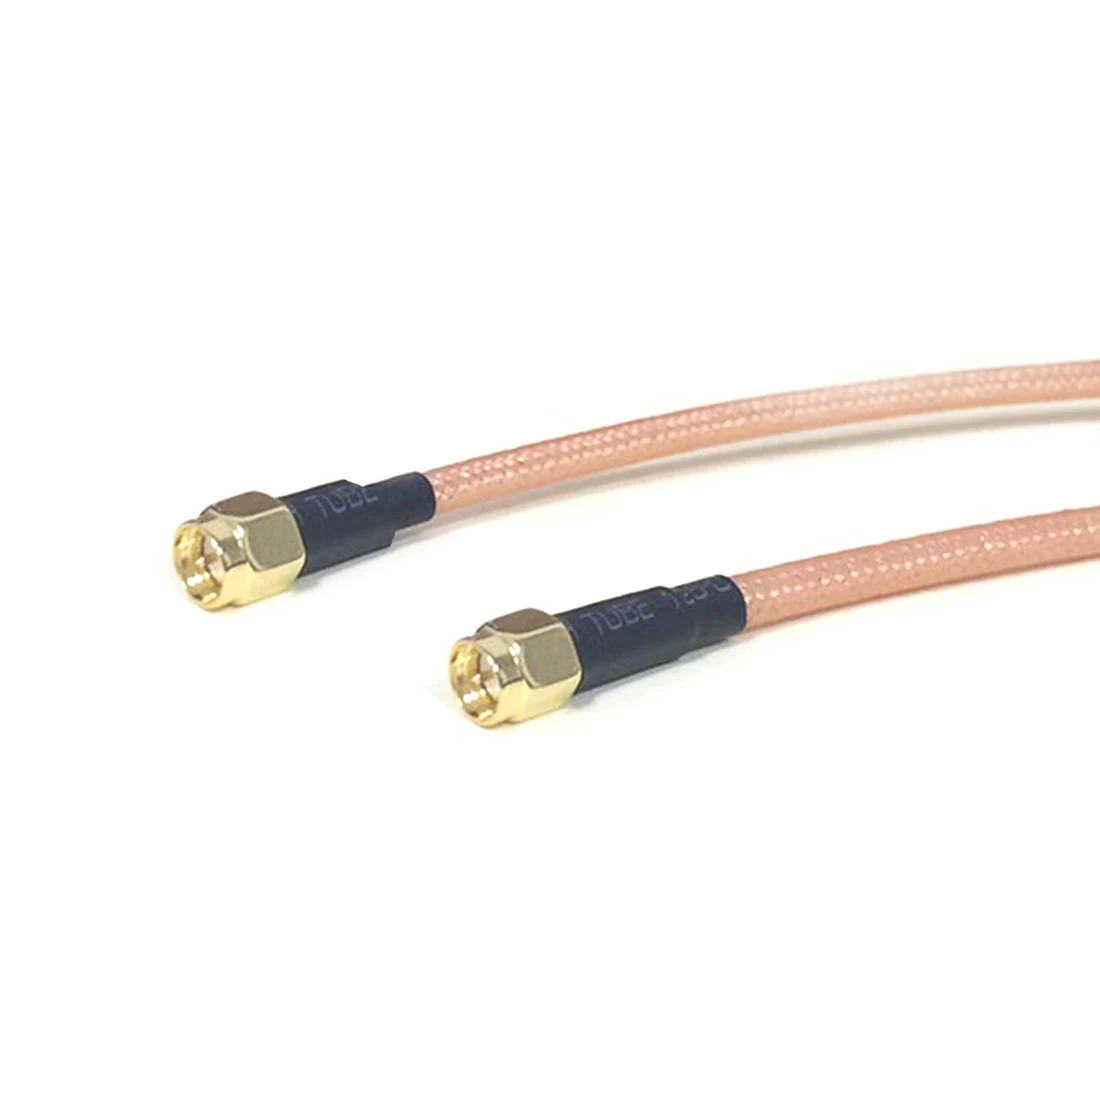 1PC SMA Male to SMA Male Plug RF Coax Cable RG400 Pigtail Adapter 50cm for Wireless Modem WIFI Antenna NEW